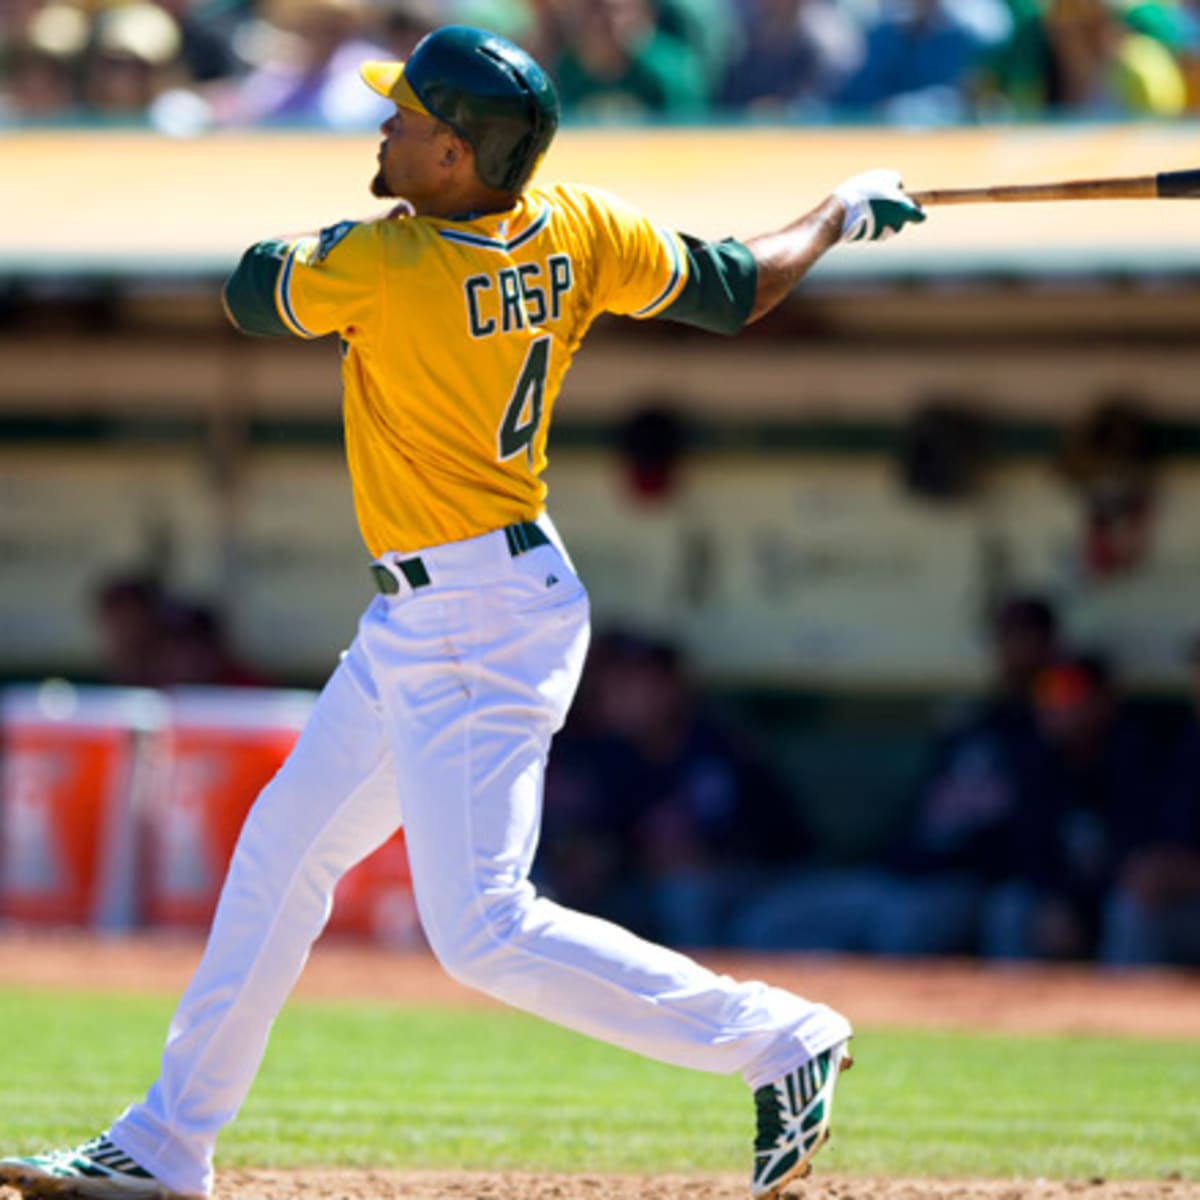 Athletics, Coco Crisp agree to two-year contract extension